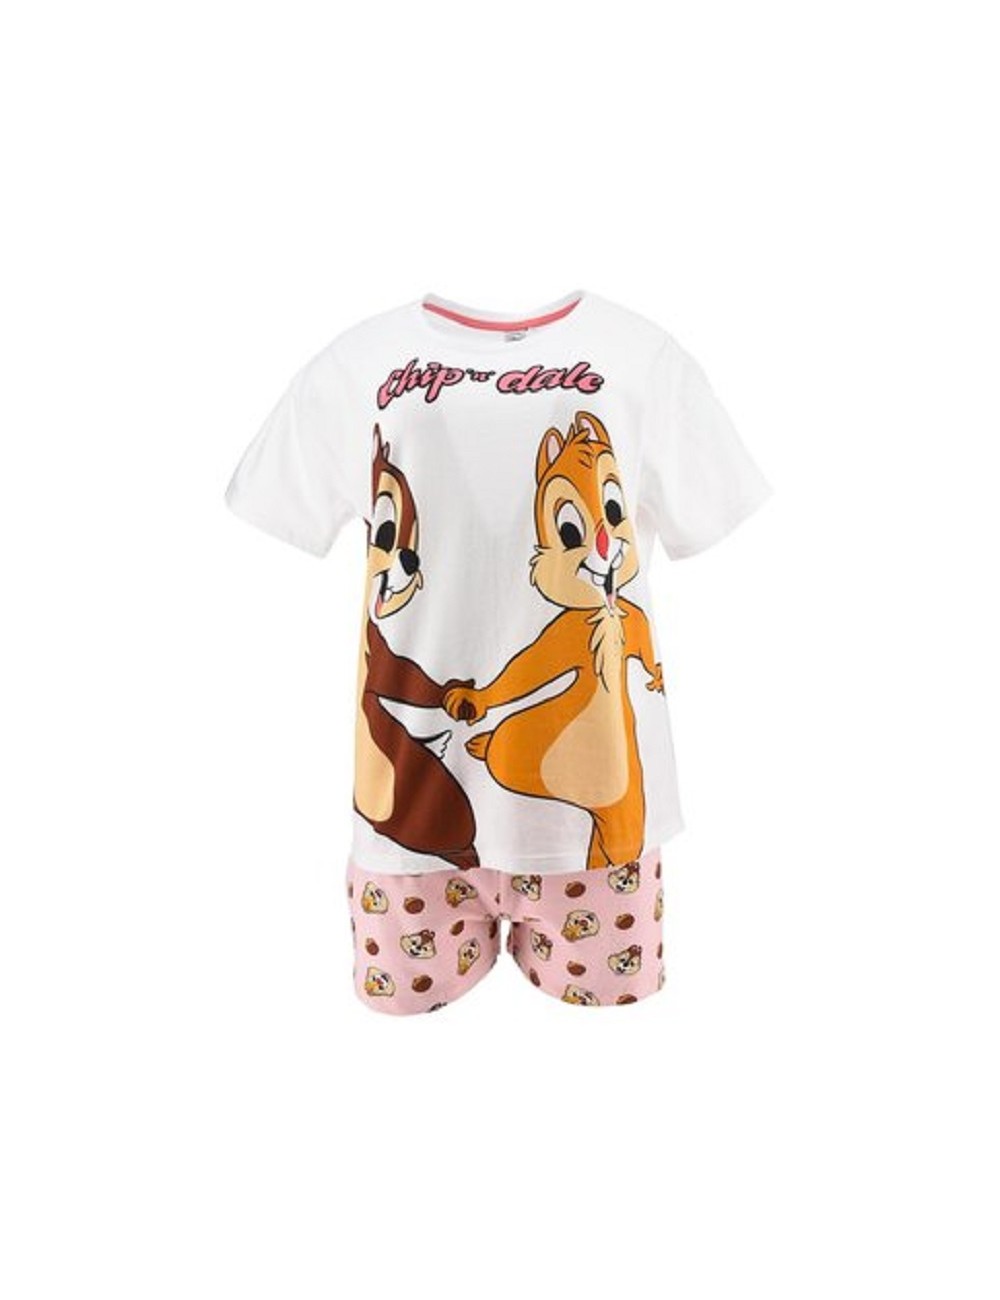 Disposed Miraculous Product Pijama femei, Chip & Dale, alb-roz, S-XL